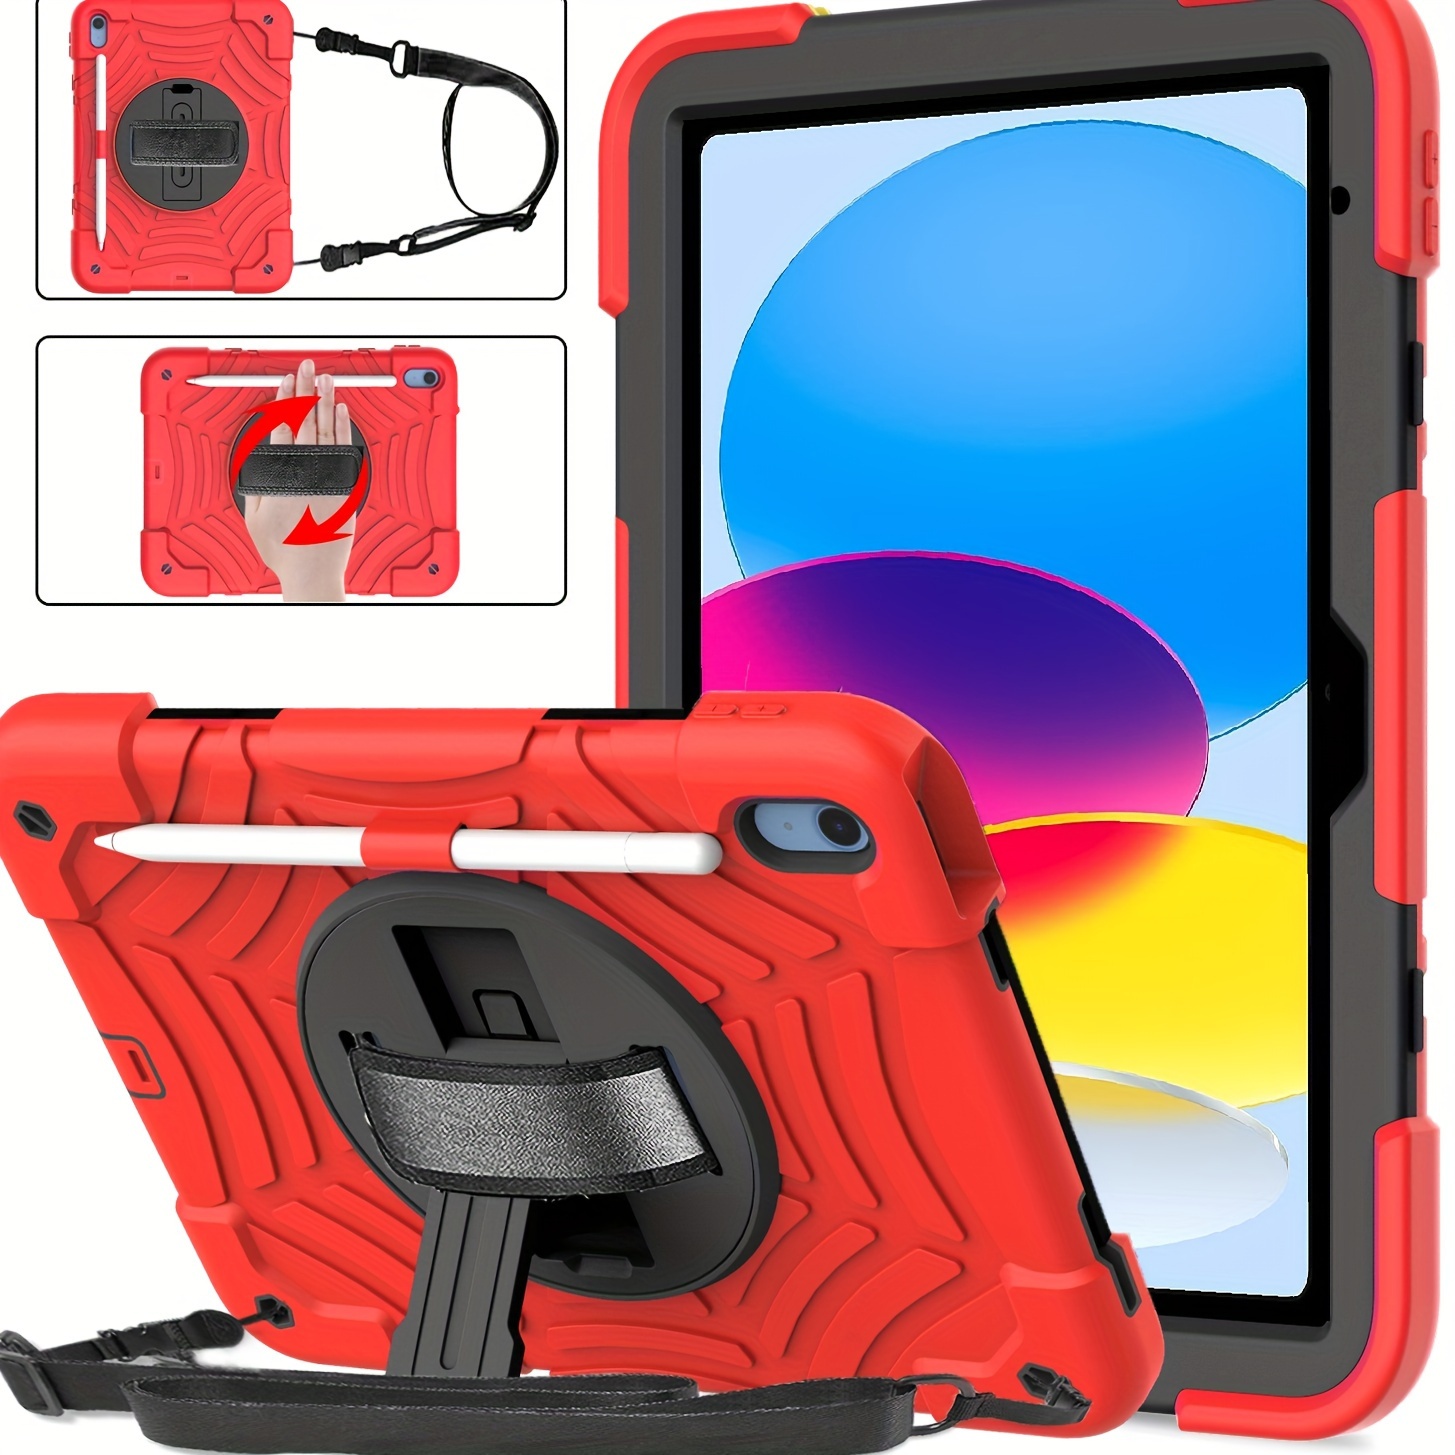 iPad 10th Generation Case (iPad 10.9 inch Case, iPad 10 Gen Case): with  Strong Protection, Screen Protector, Hand Strap, Shoulder Strap, 360°  Rotating